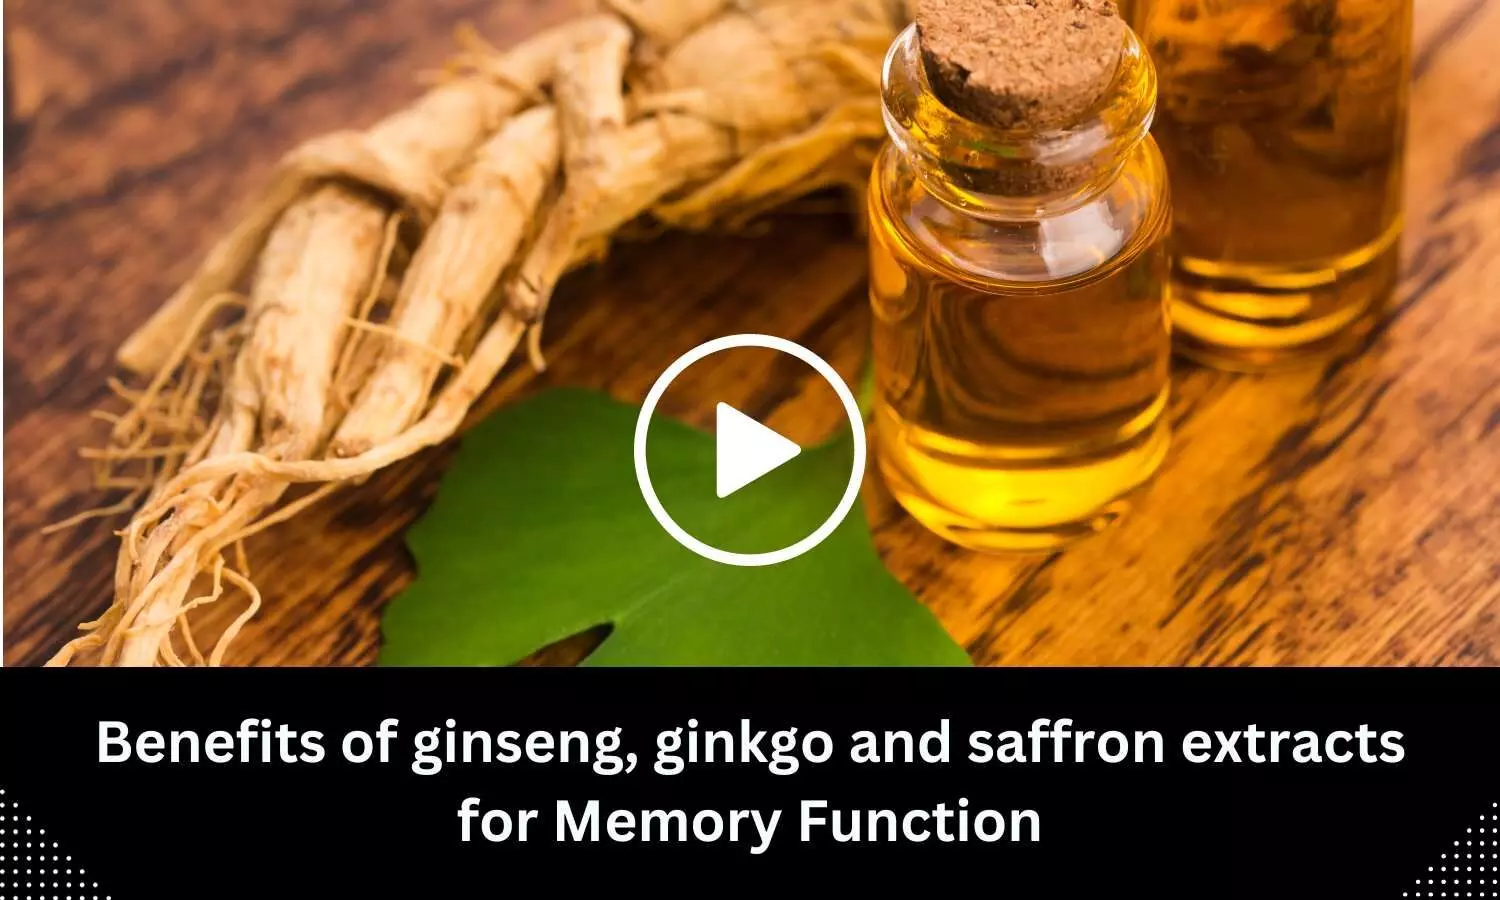 Benefits of ginseng, ginkgo, and saffron extracts for Memory Function